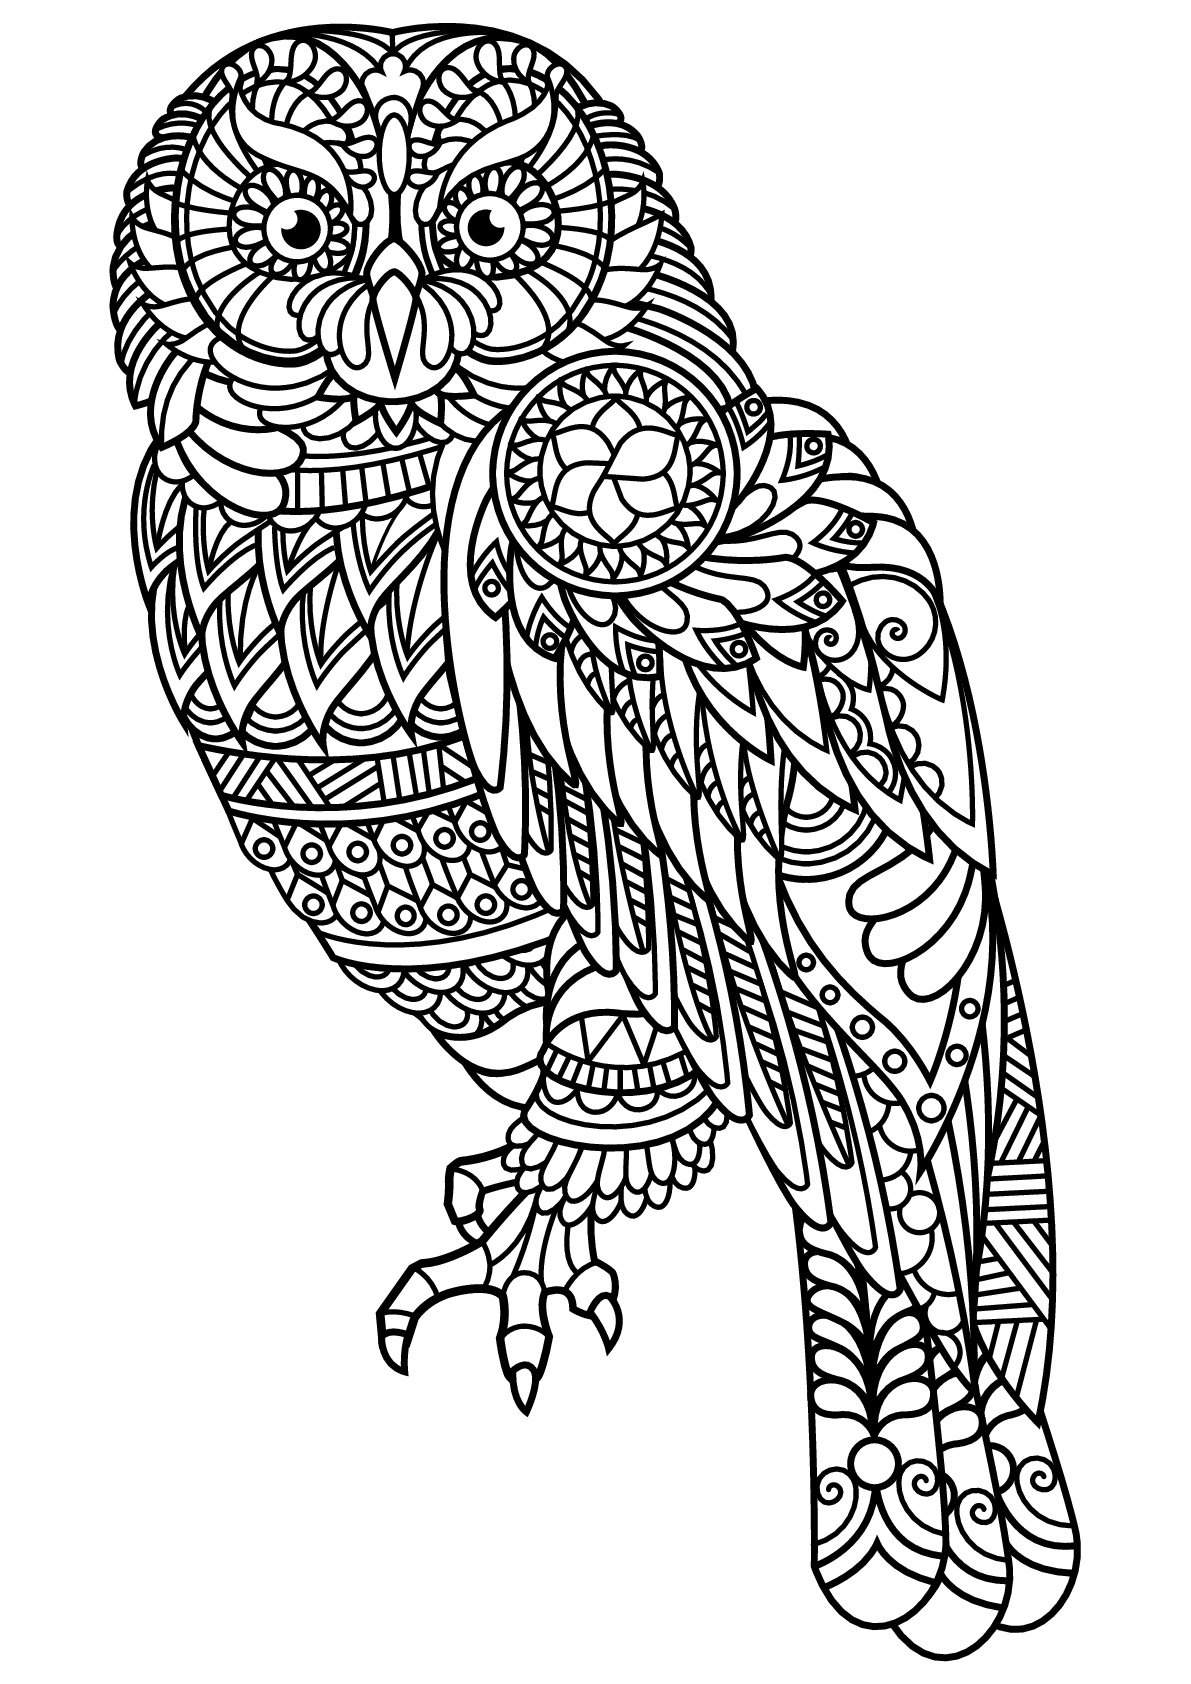 Download Free book owl - Owls Adult Coloring Pages